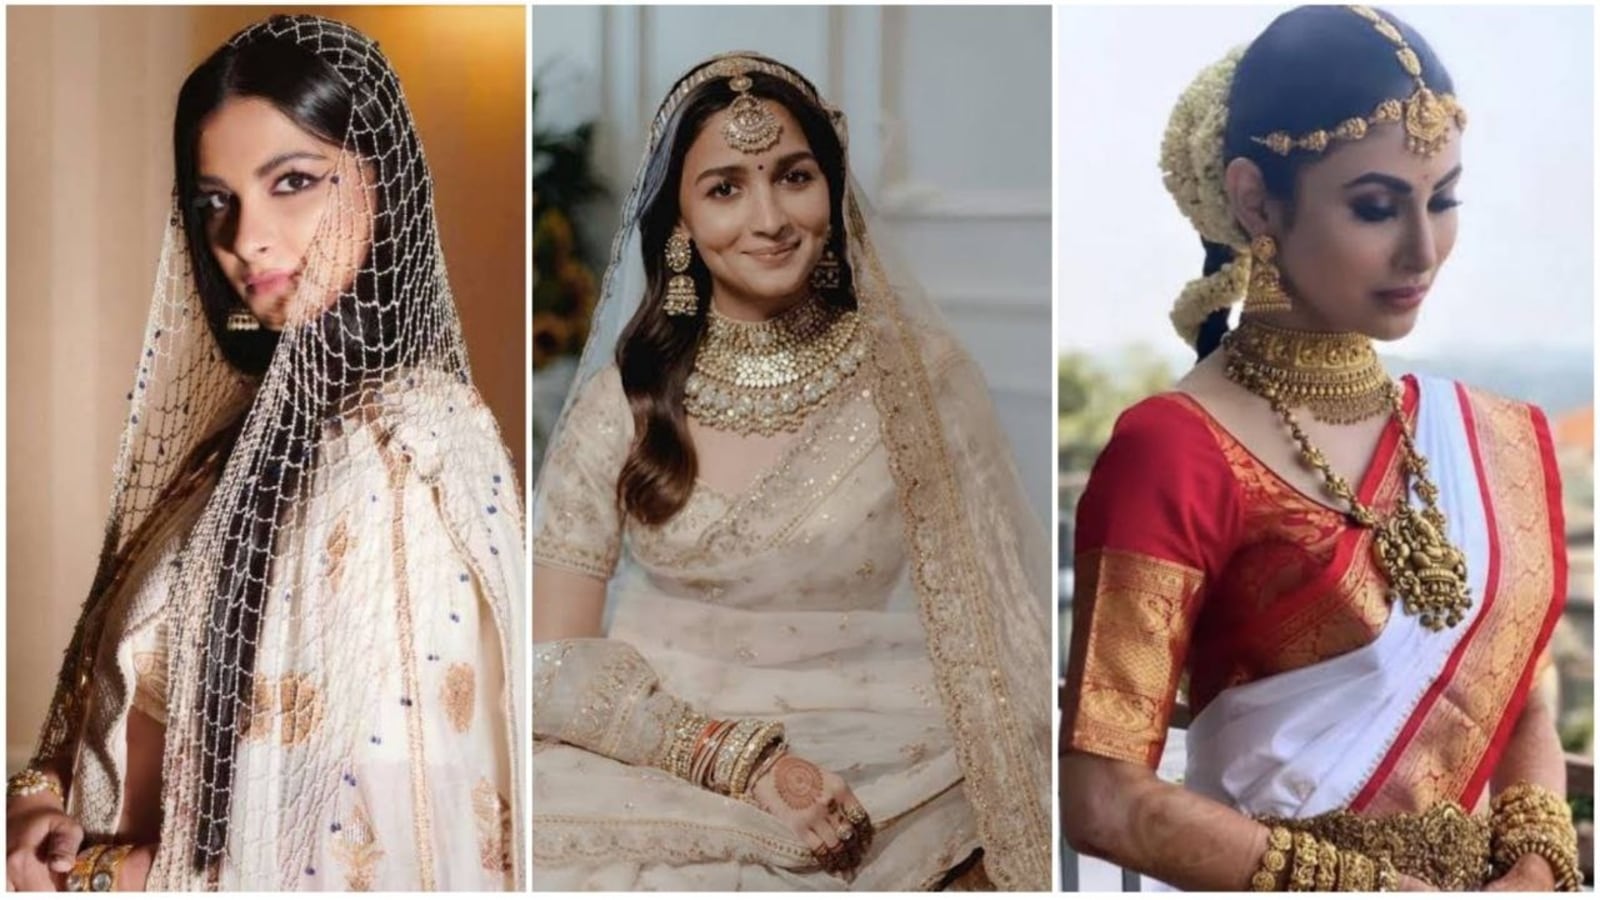 Desi Folks Must Curb Their Habit Of Doling Out Unsolicited Criticism To  Celebrity Brides